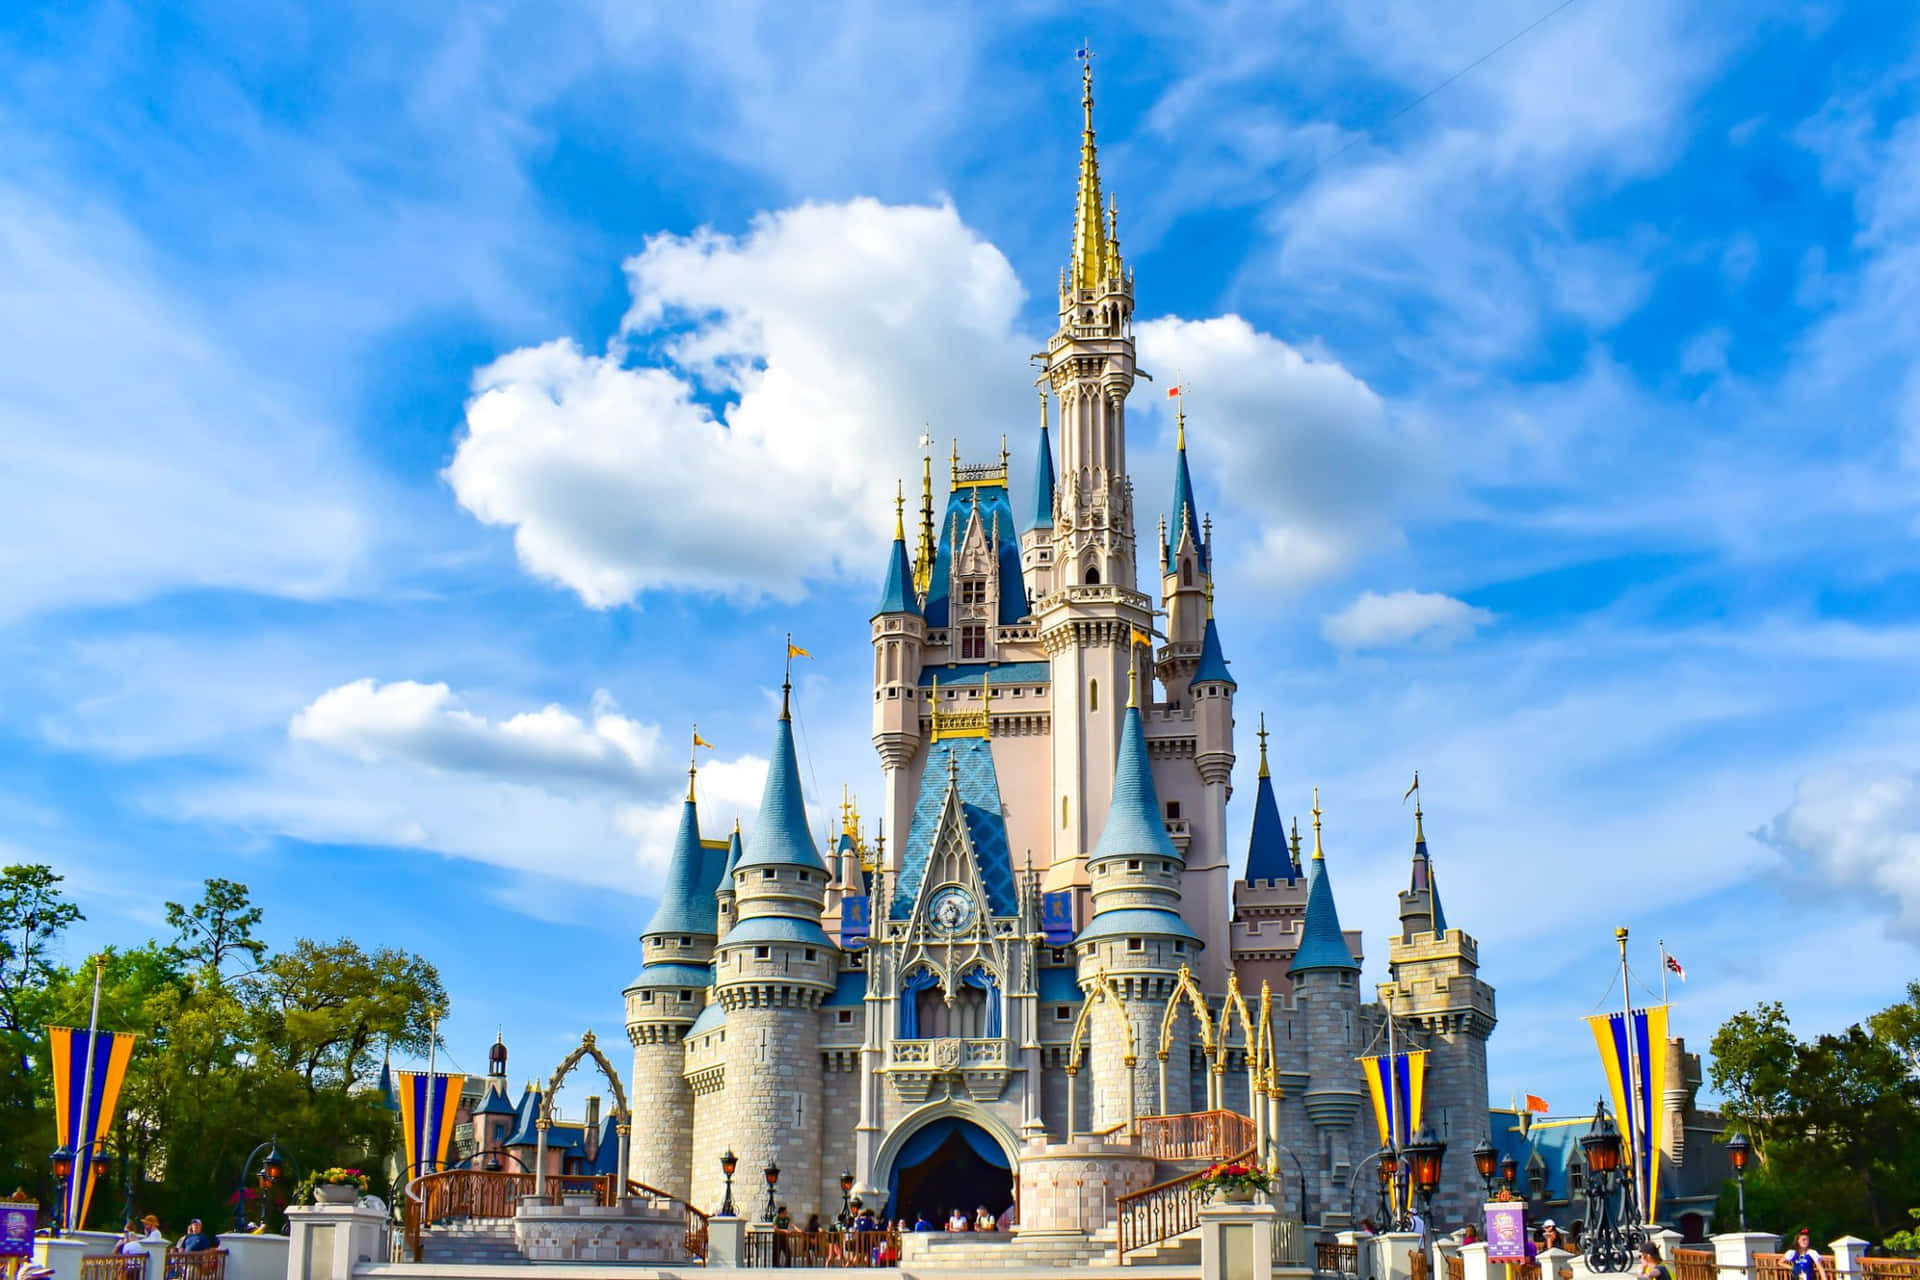 Spend your next family vacation at the happiest place on Earth: Disney World!